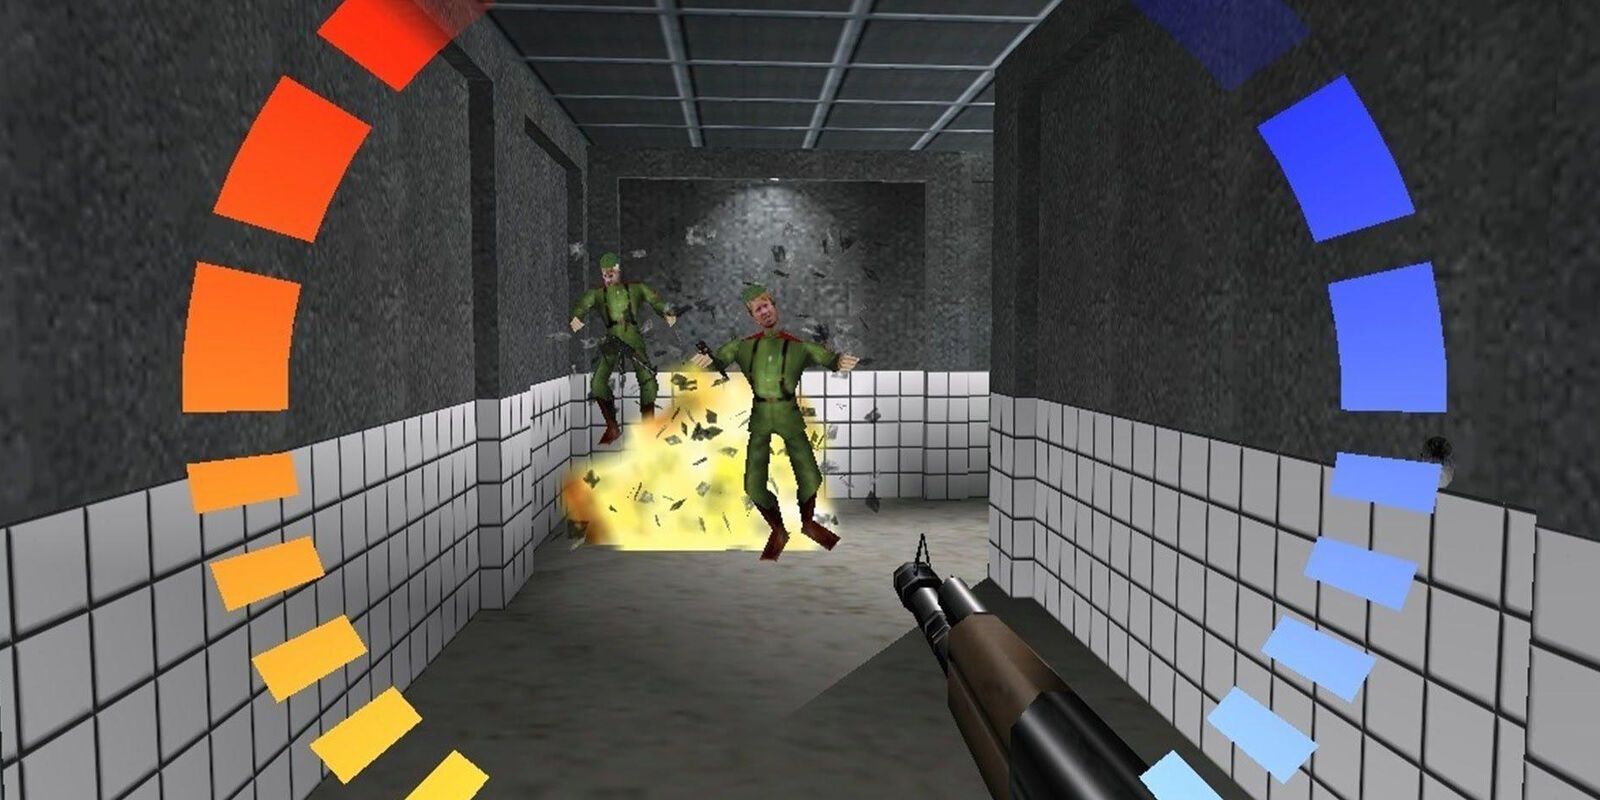 A screenshot from GoldenEye 007, showing two enemies being killed by an explosion down a hallway.